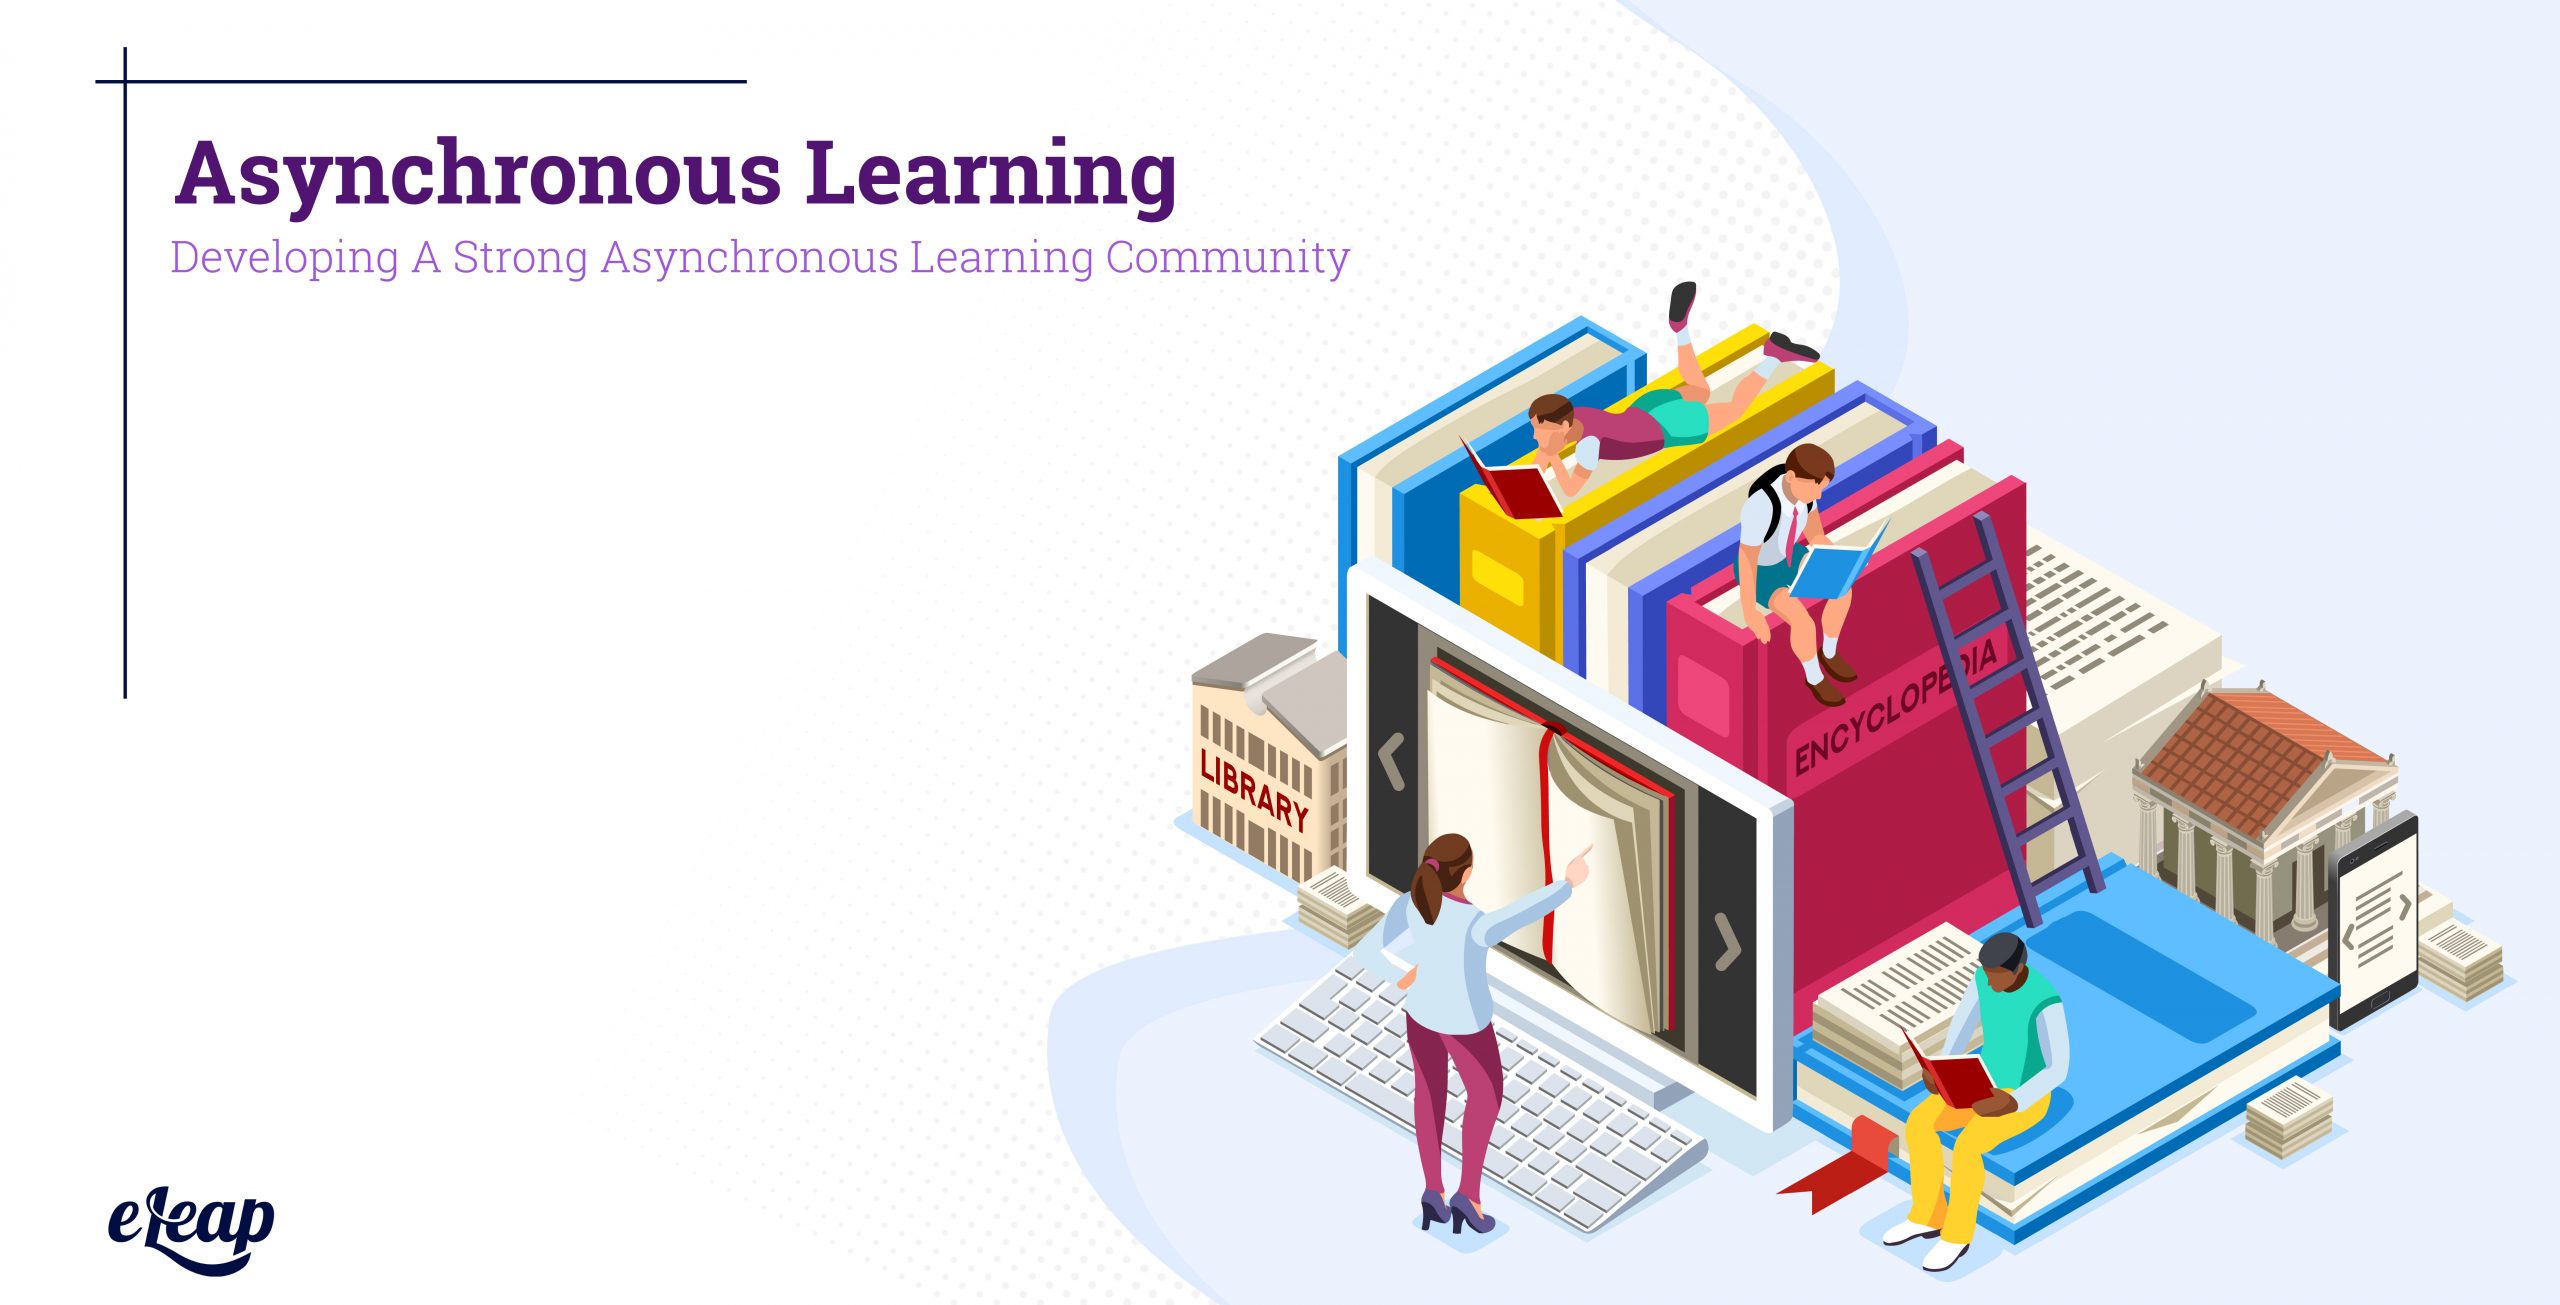 Asynchronous learning